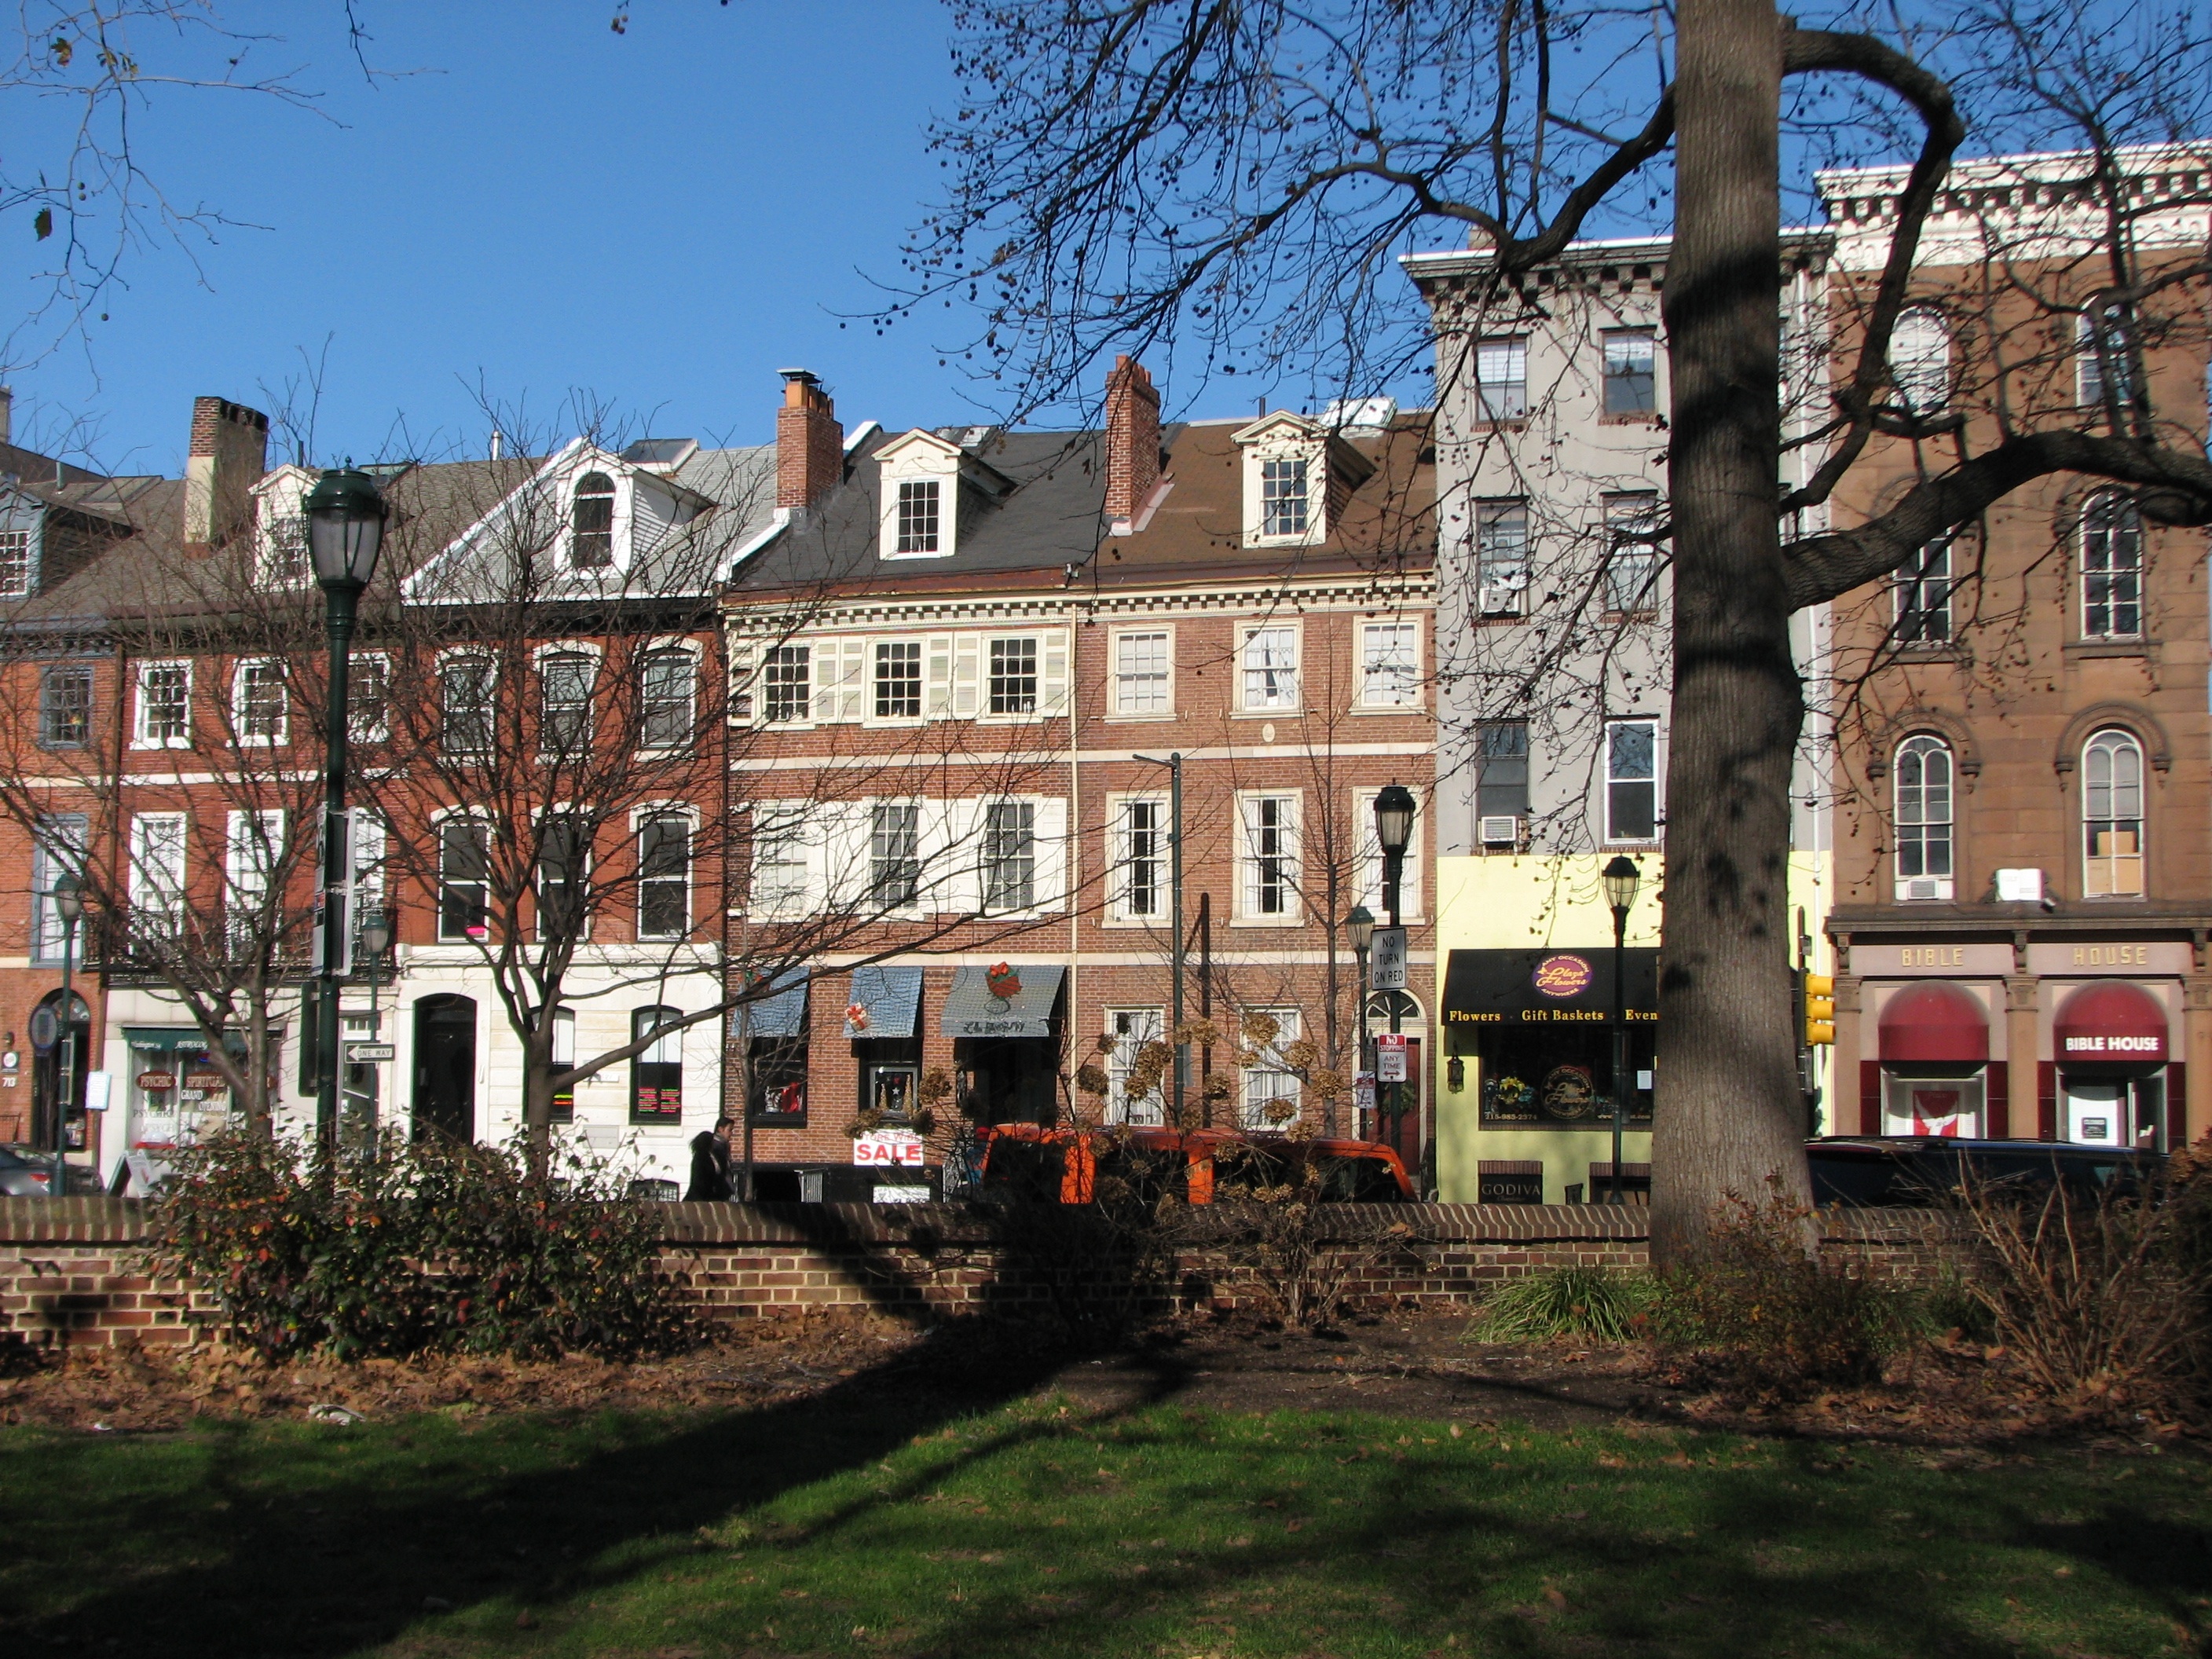 Benjamin Latrobe designed the identical row houses that once lined the 700 block of Walnut.